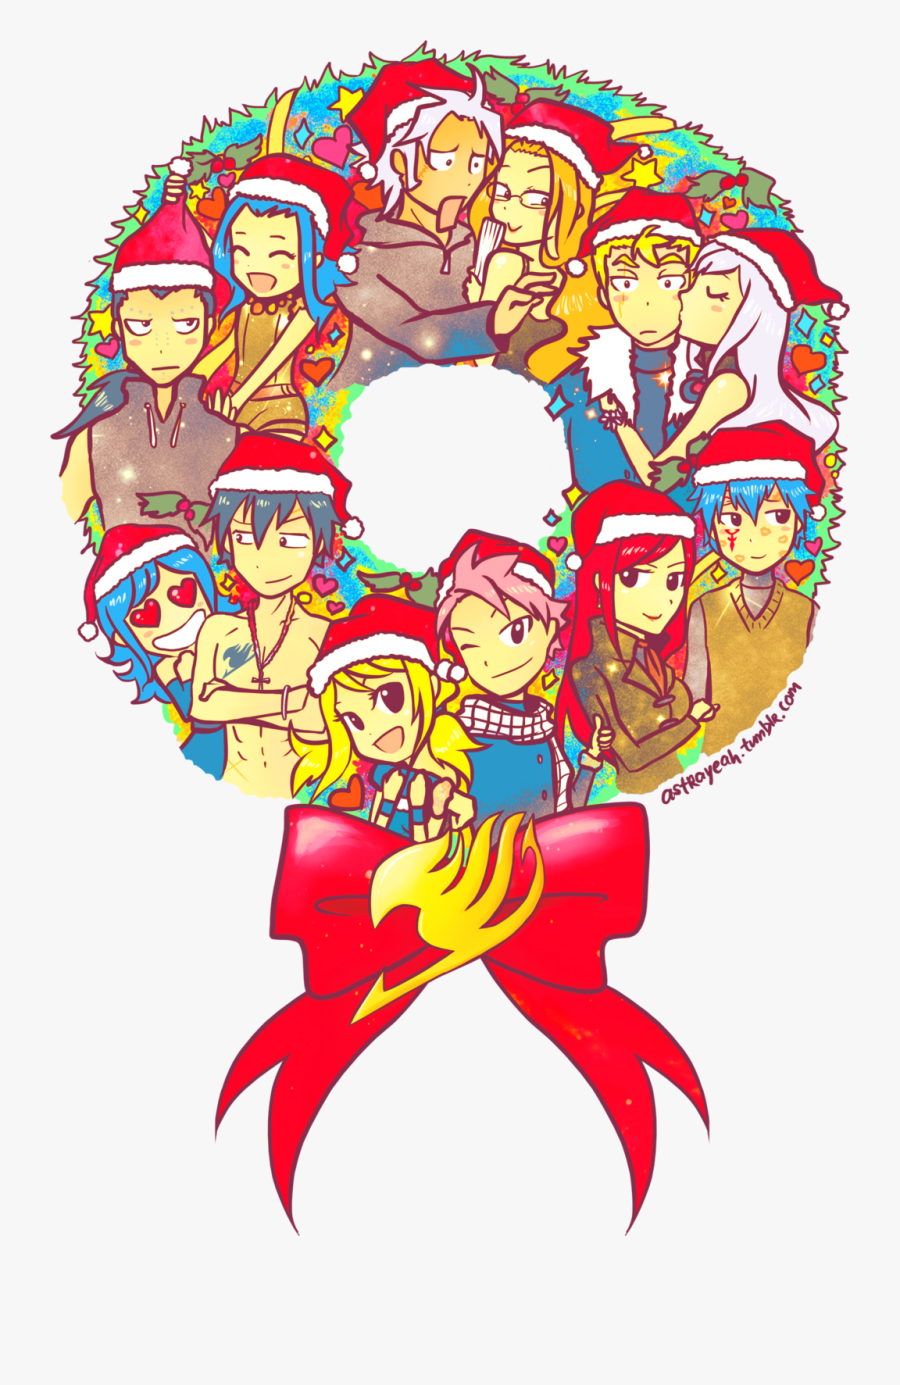 Gruviapon 195 34 Fairy Tail Christmas 2013 By Astrayeah - Merry Christmas Fairy Tail, Transparent Clipart